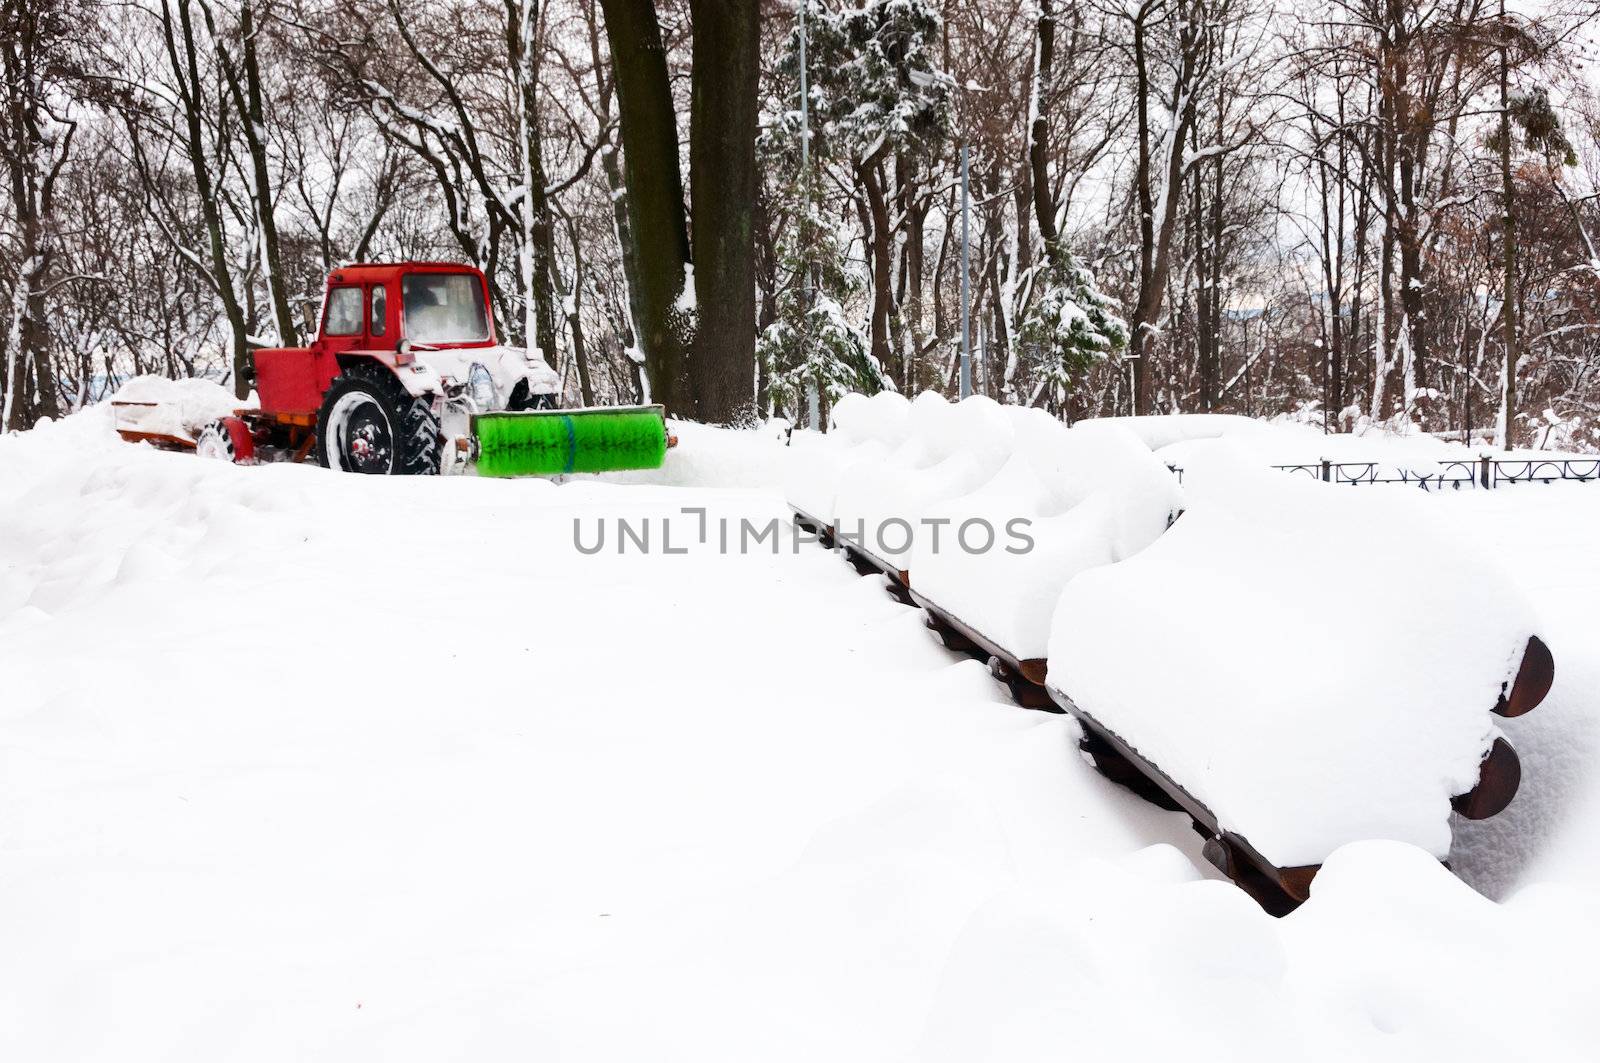 Red tractor cleaning winter park after snowfall with wooden benches on front